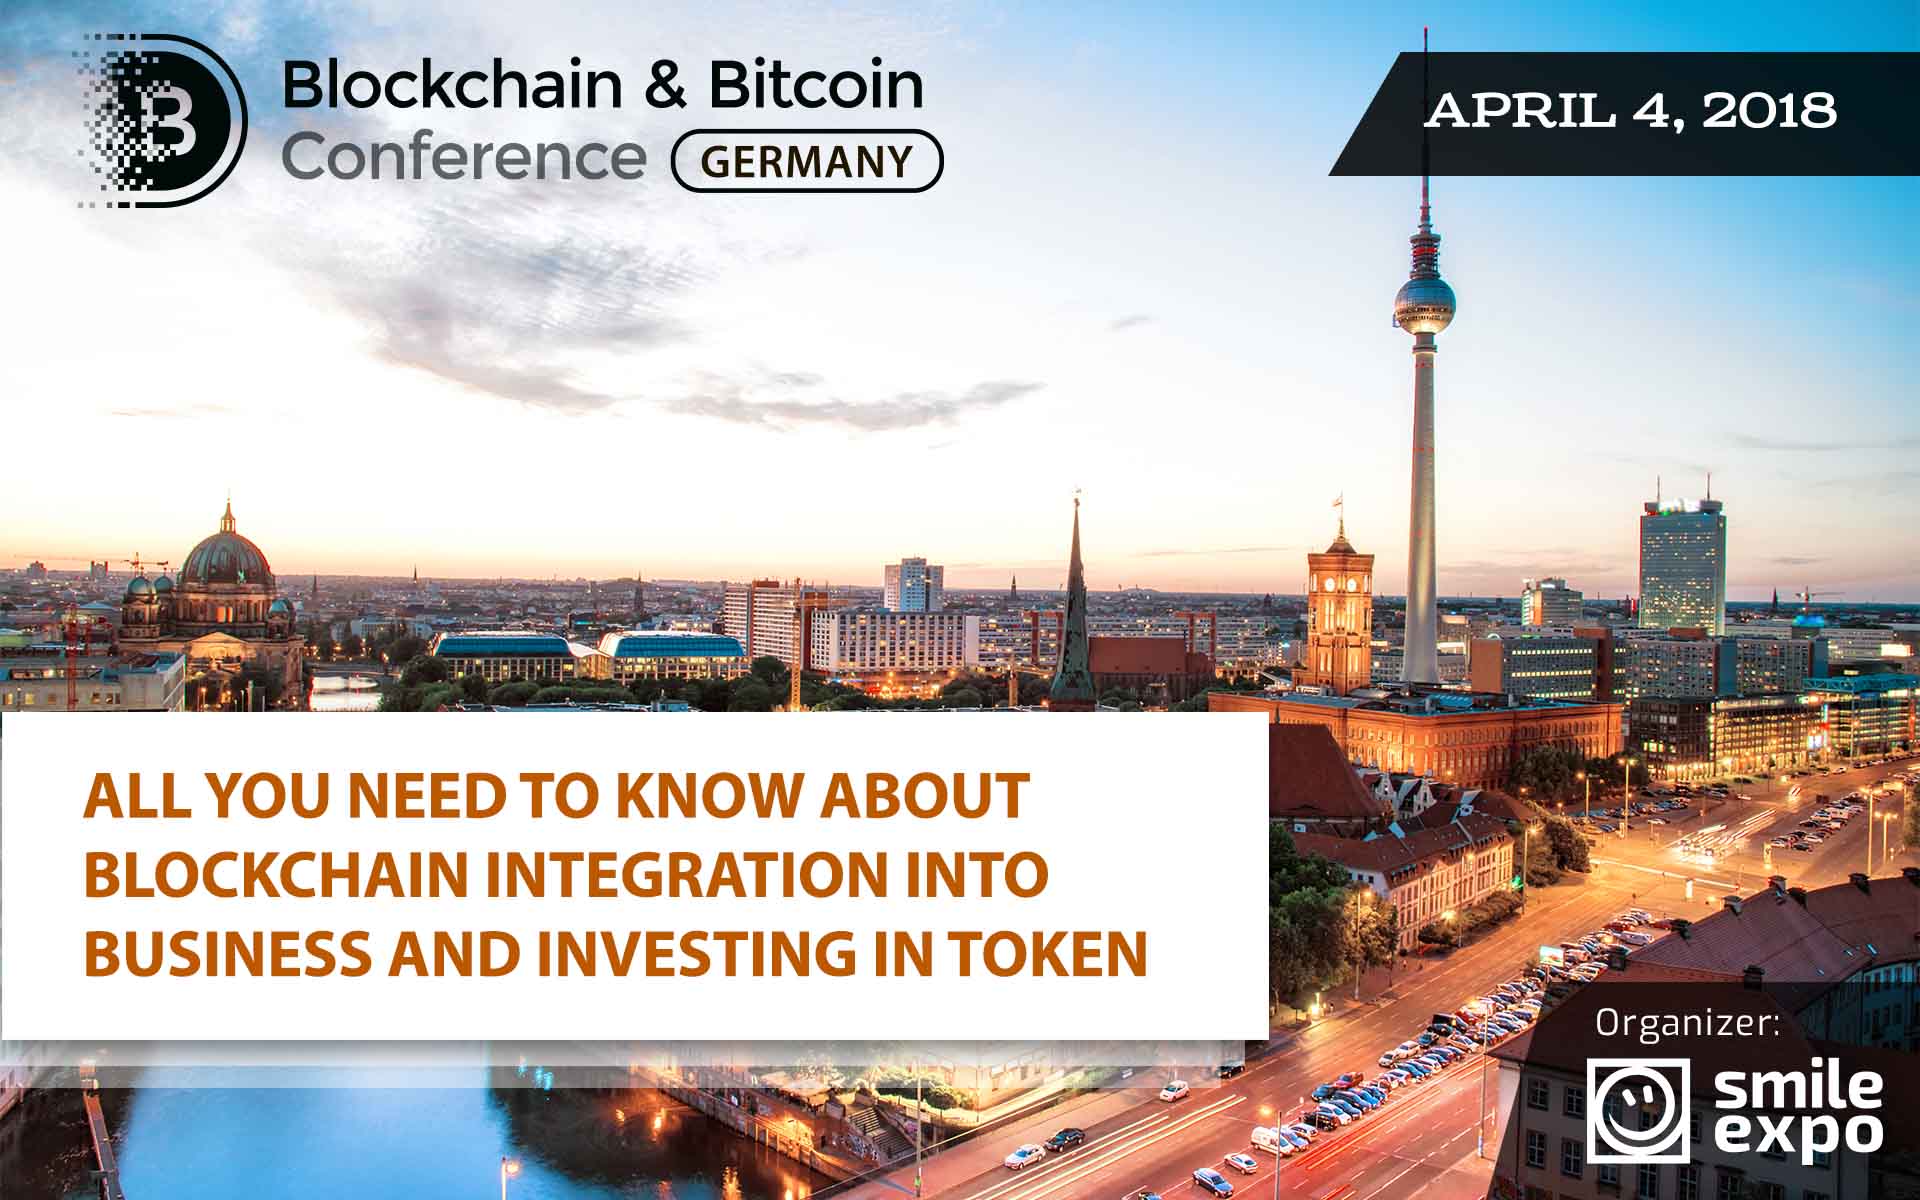 Trends and Regulation of the Crypto Industry Discussed at Blockchain & Bitcoin Conference Germany on April 4